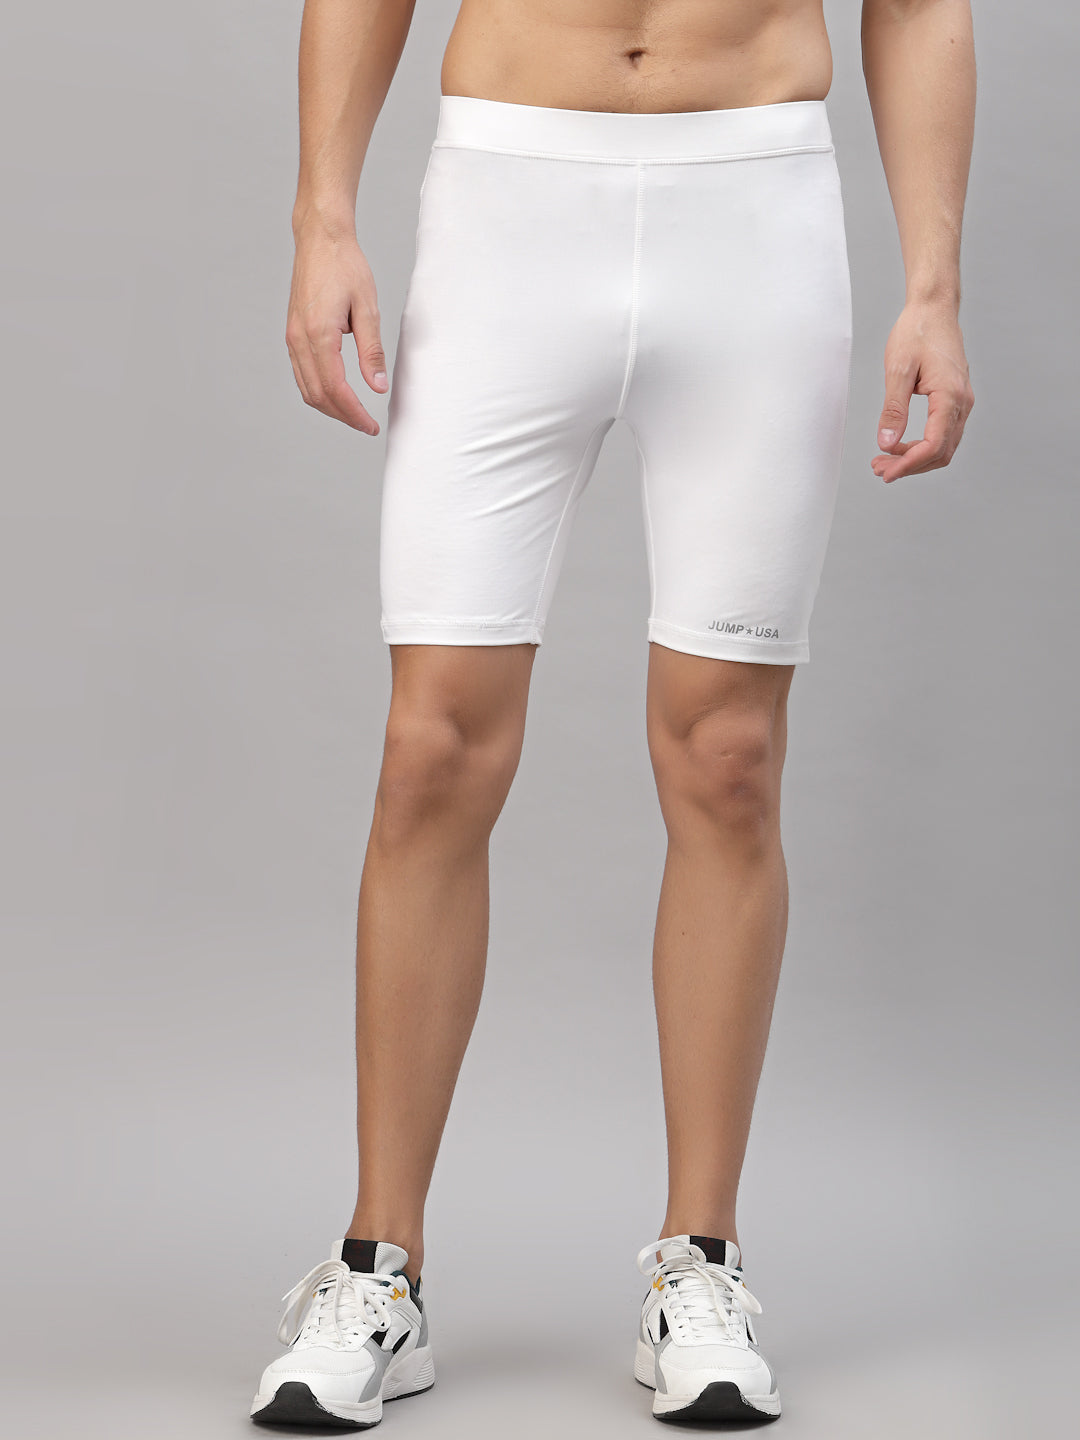 JUMP USA Men White Rapid Dry-Fit Solid Training Short Tights